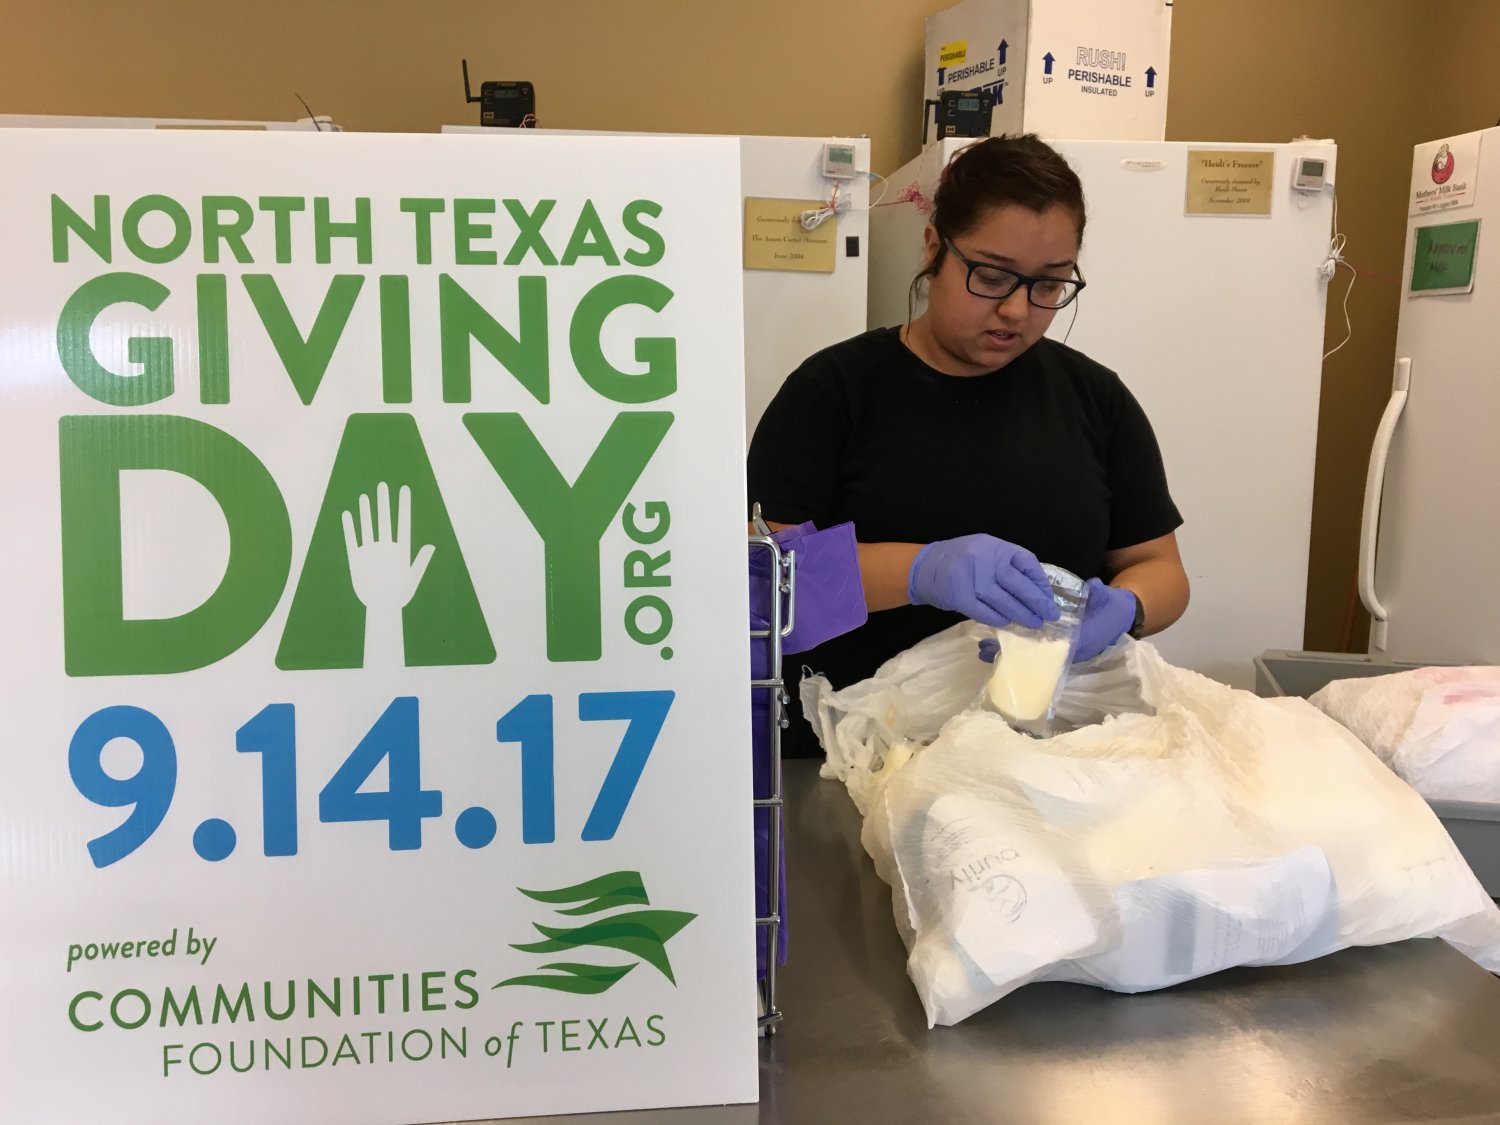 Employee checking pump dates on bags of donated breastmilk